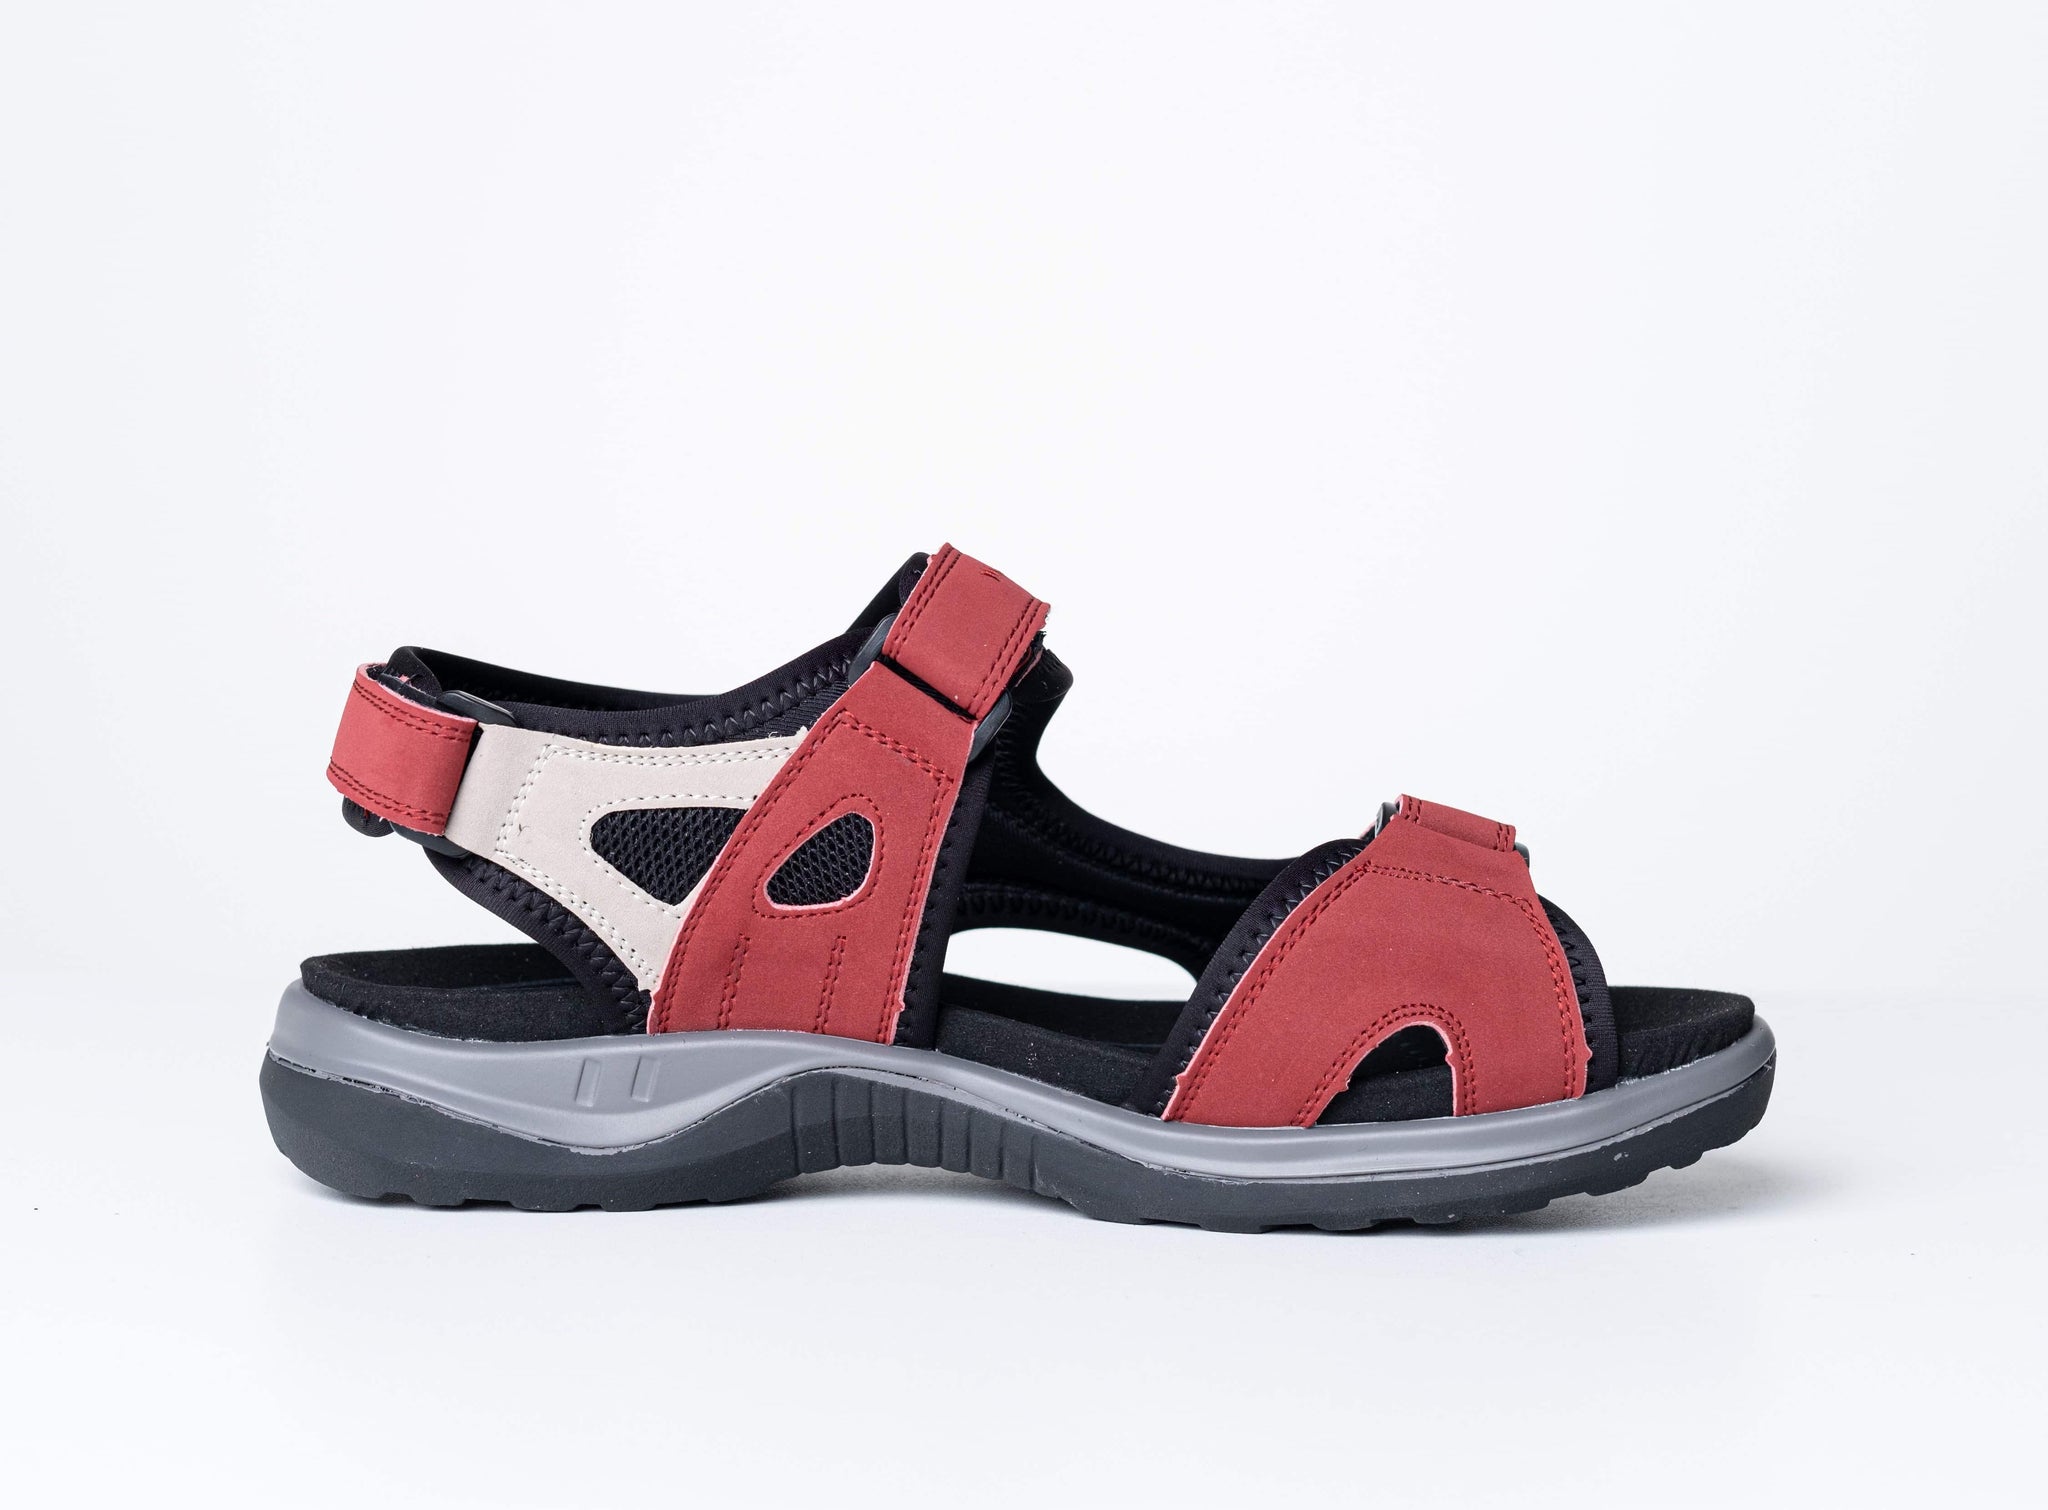 Buy Sparx Women's Navy Floater Sandals for Women at Best Price @ Tata CLiQ